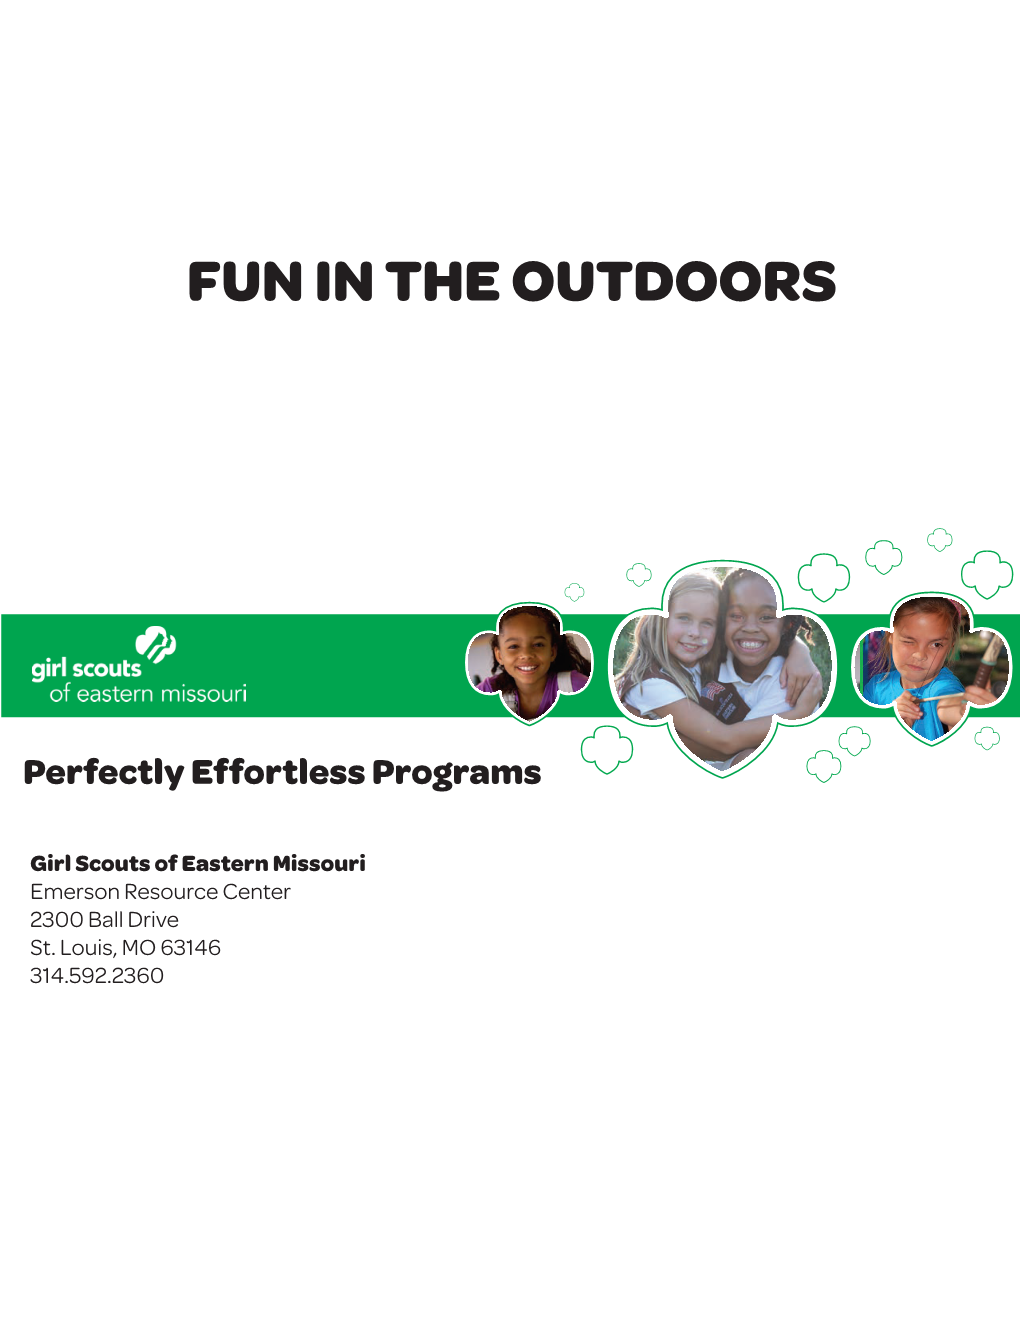 Fun in the Outdoors Perfectly Effortless Program